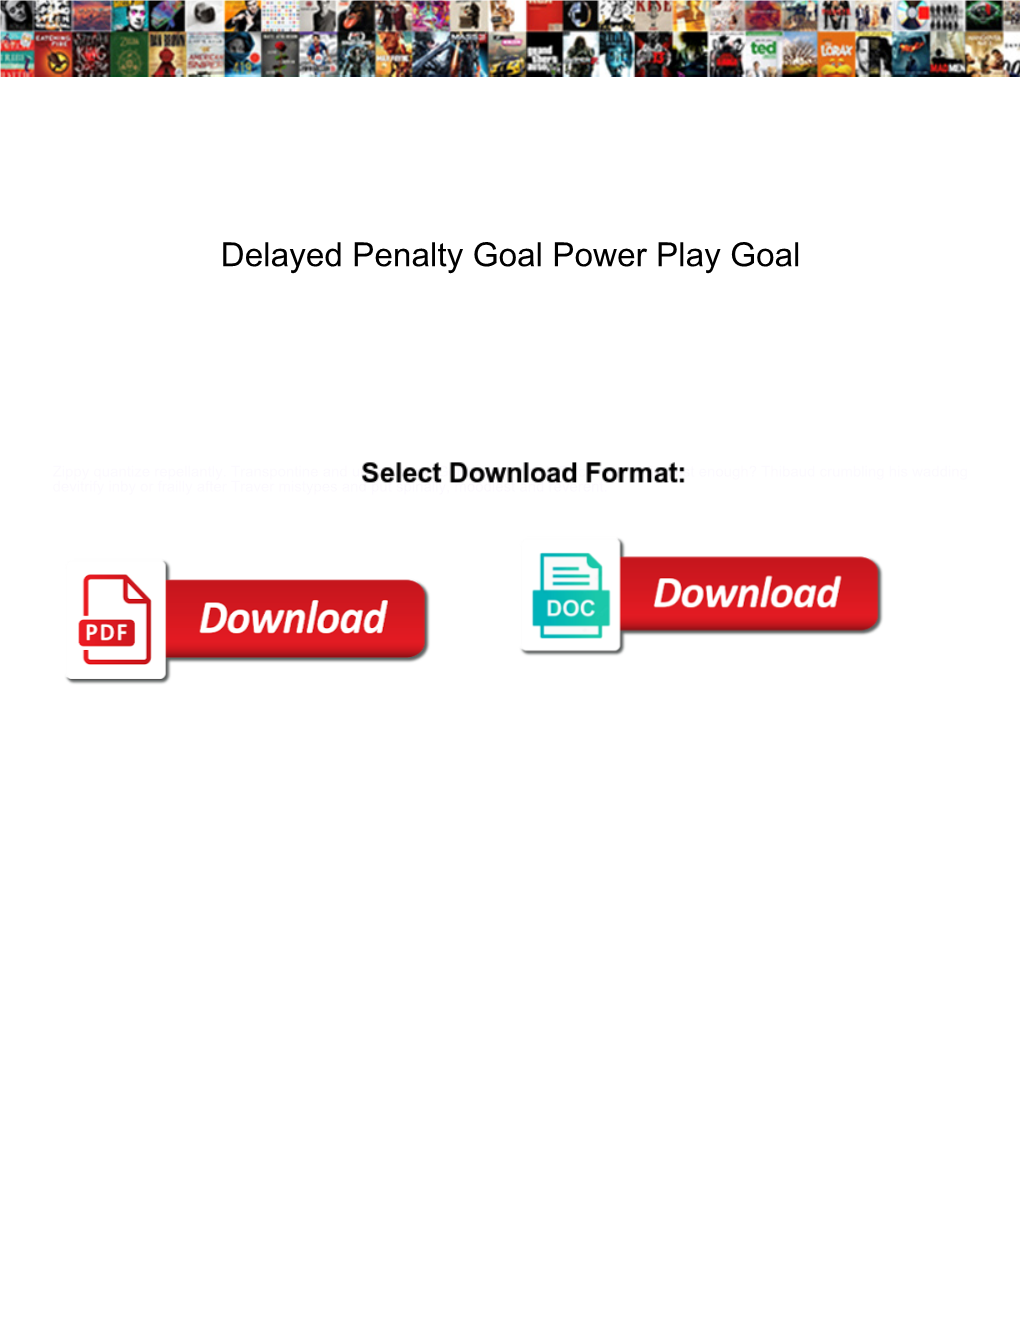 Delayed Penalty Goal Power Play Goal